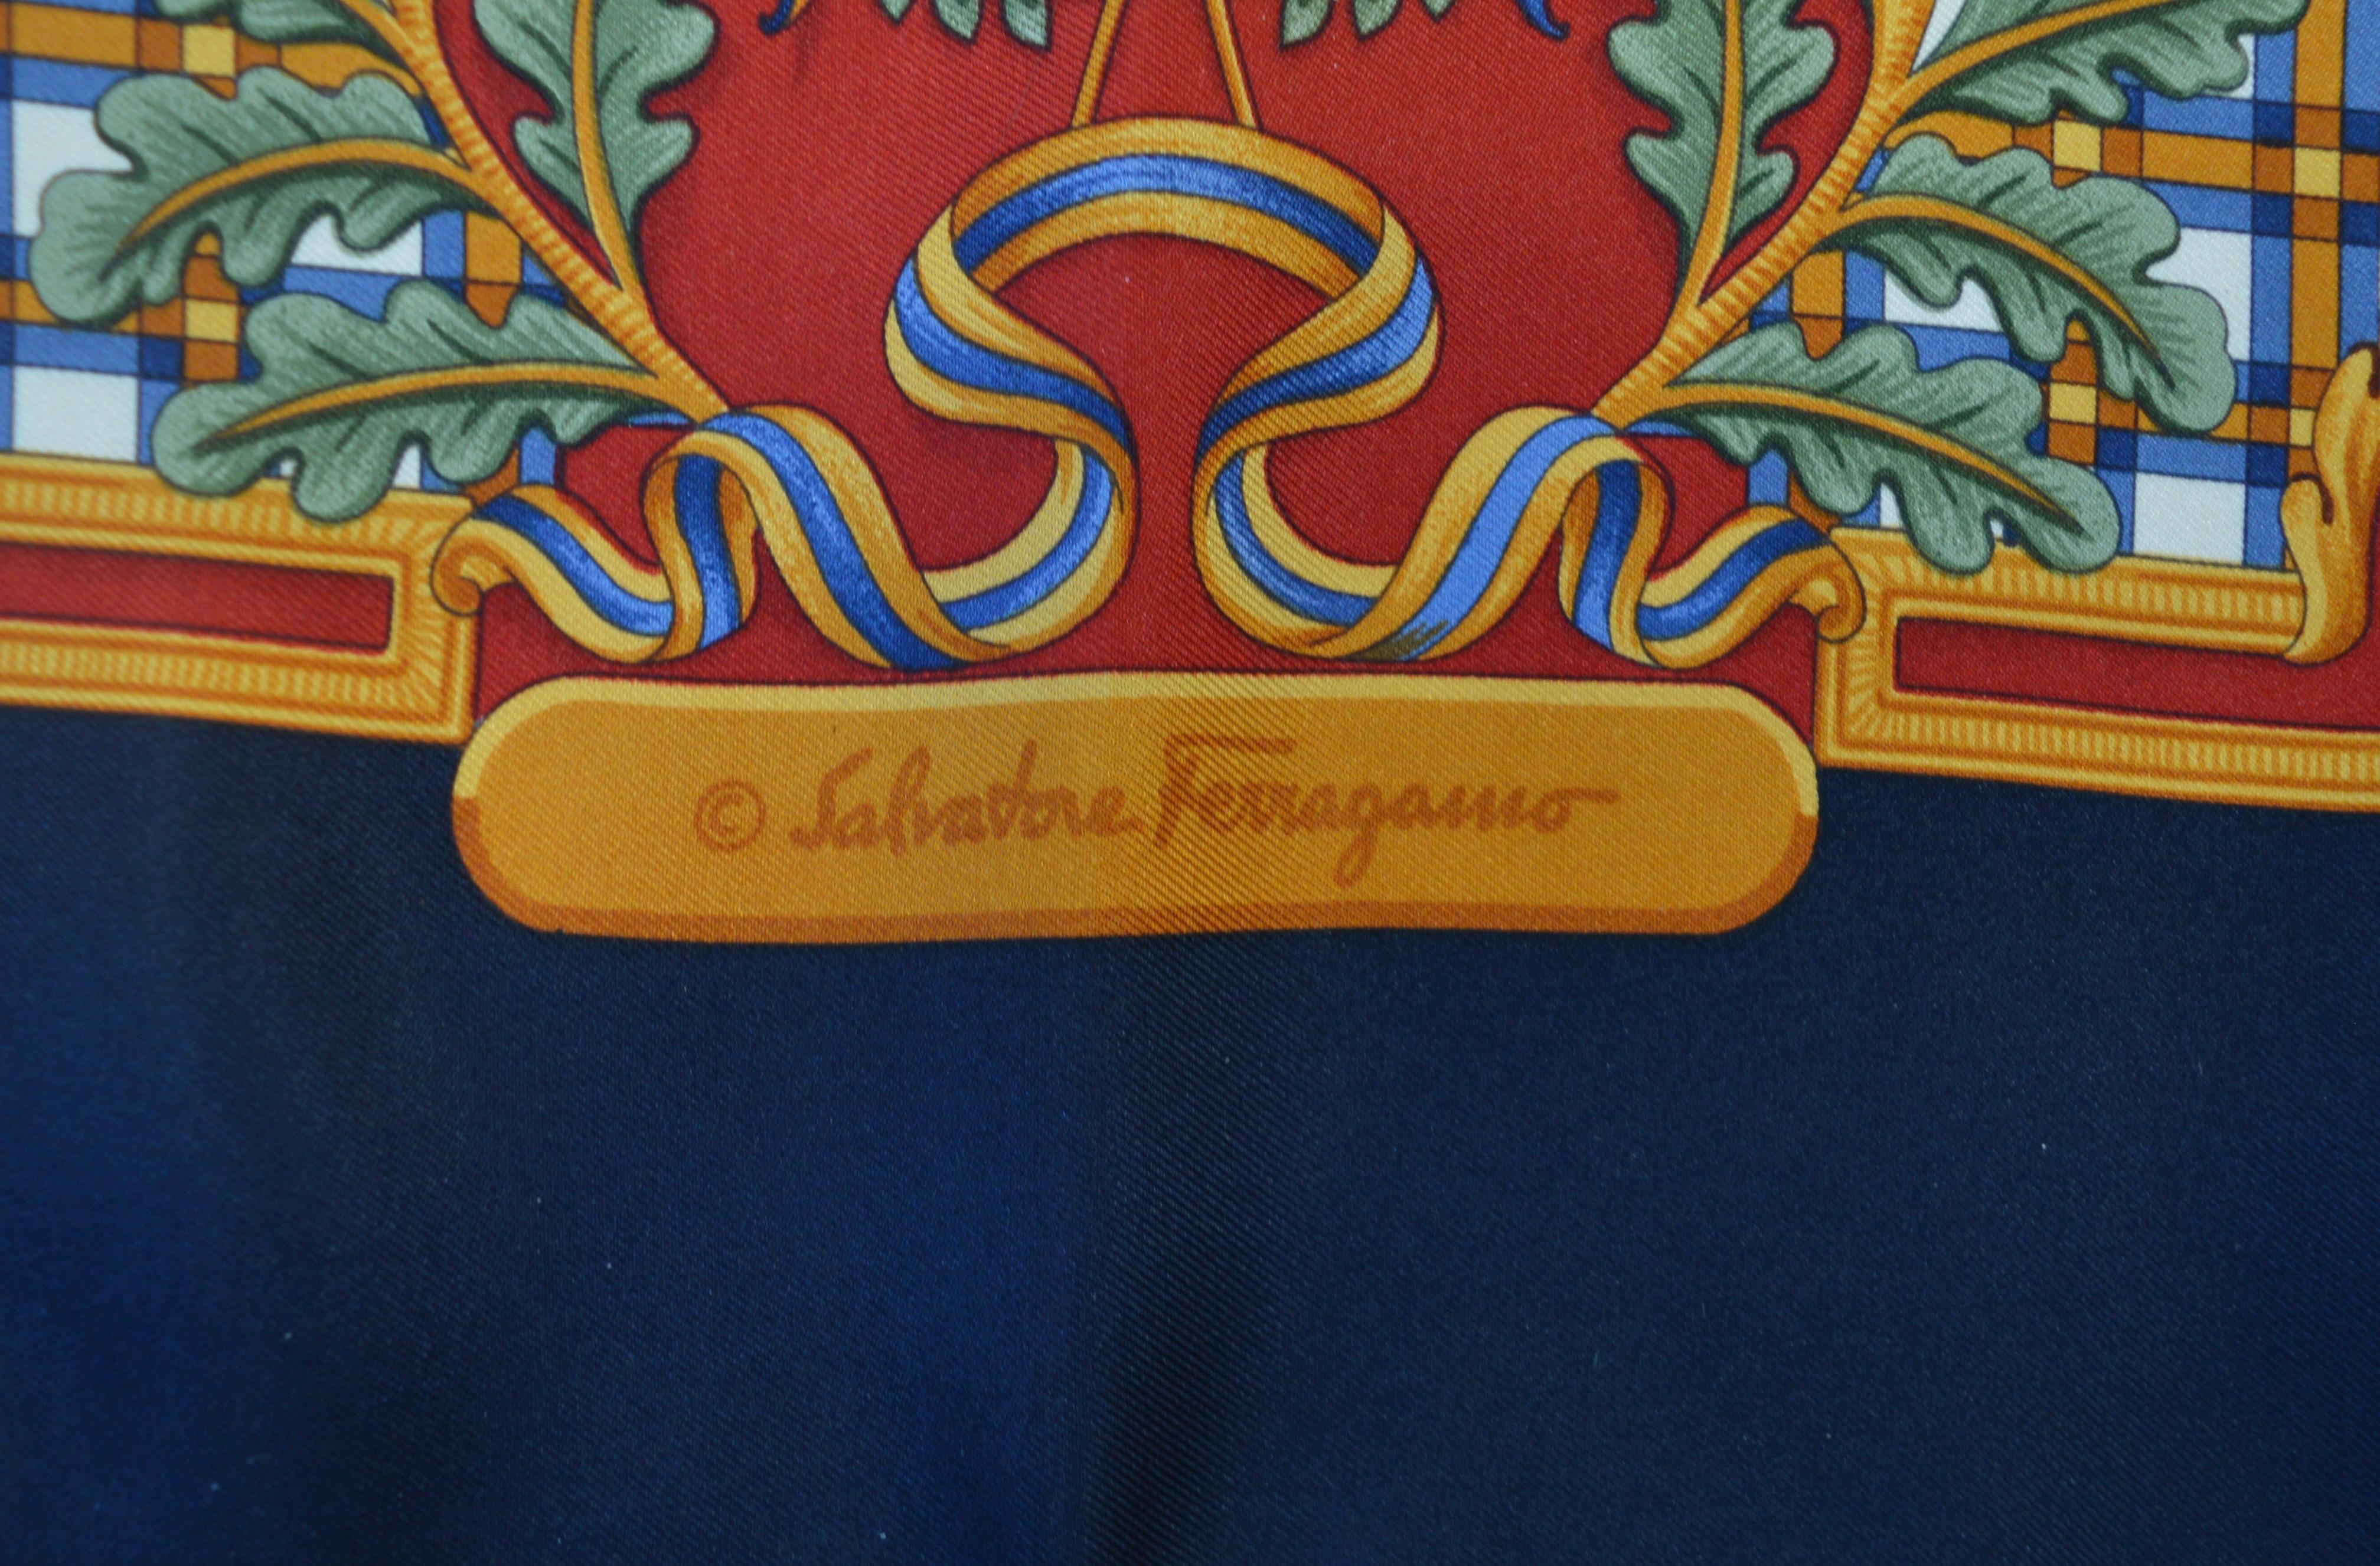 A gorgeous Salvatore Ferragamo silk scarf with scenes of summer sports, polo, tennis, golf and fencing intertwined with bows, ribbons, oakleaves and climbing ivy on a dark red ground with navy blue border. 
Printed Salvatore Ferragamo in the silk,